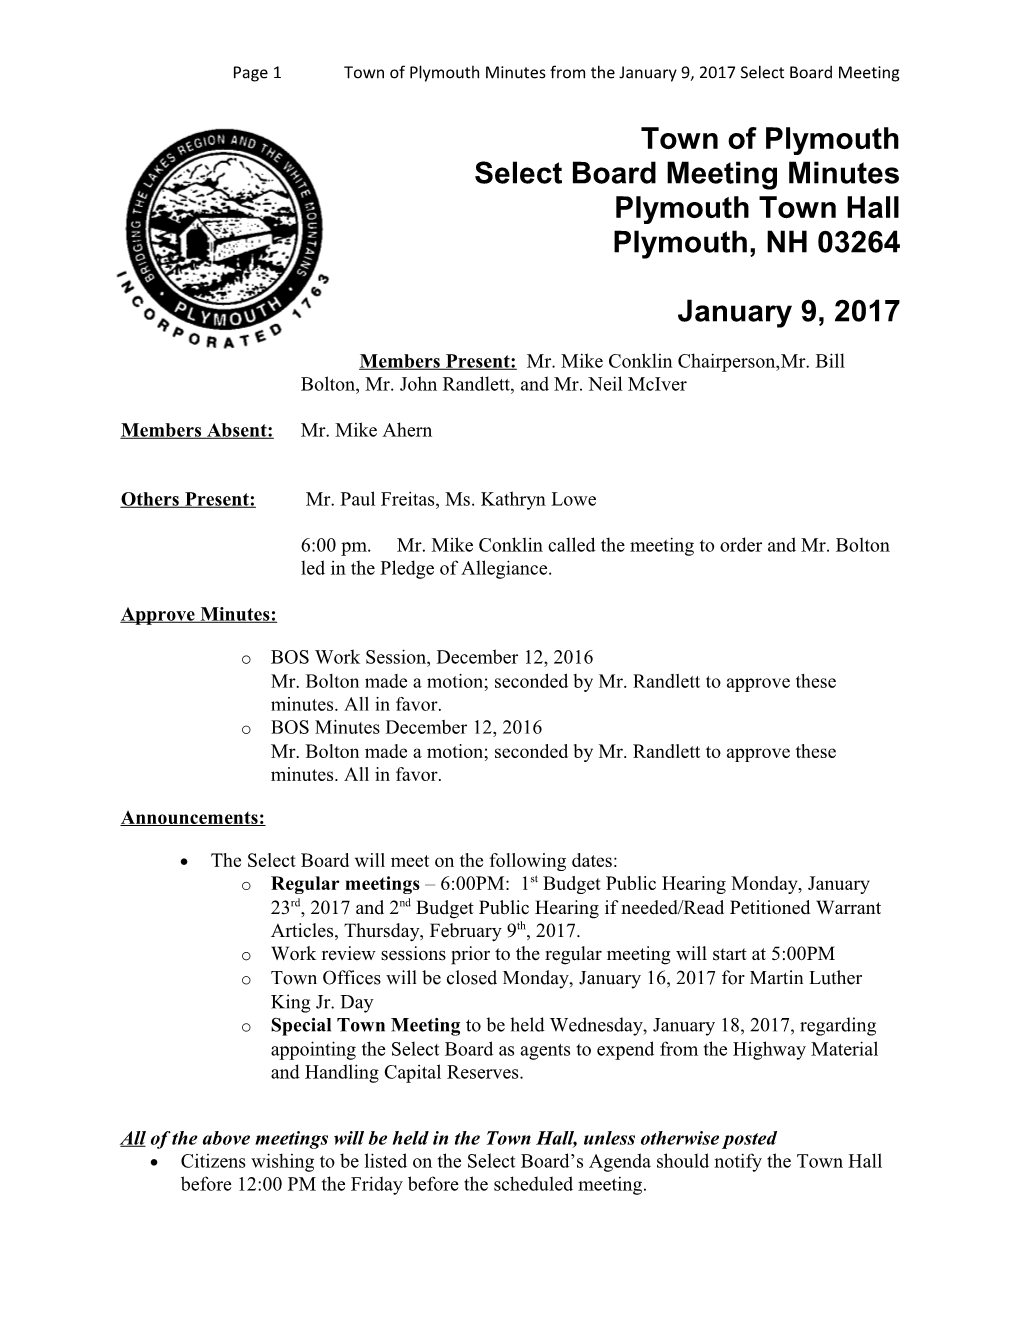 Page 1Town of Plymouth Minutes from Thejanuary 9, 2017 Select Board Meeting